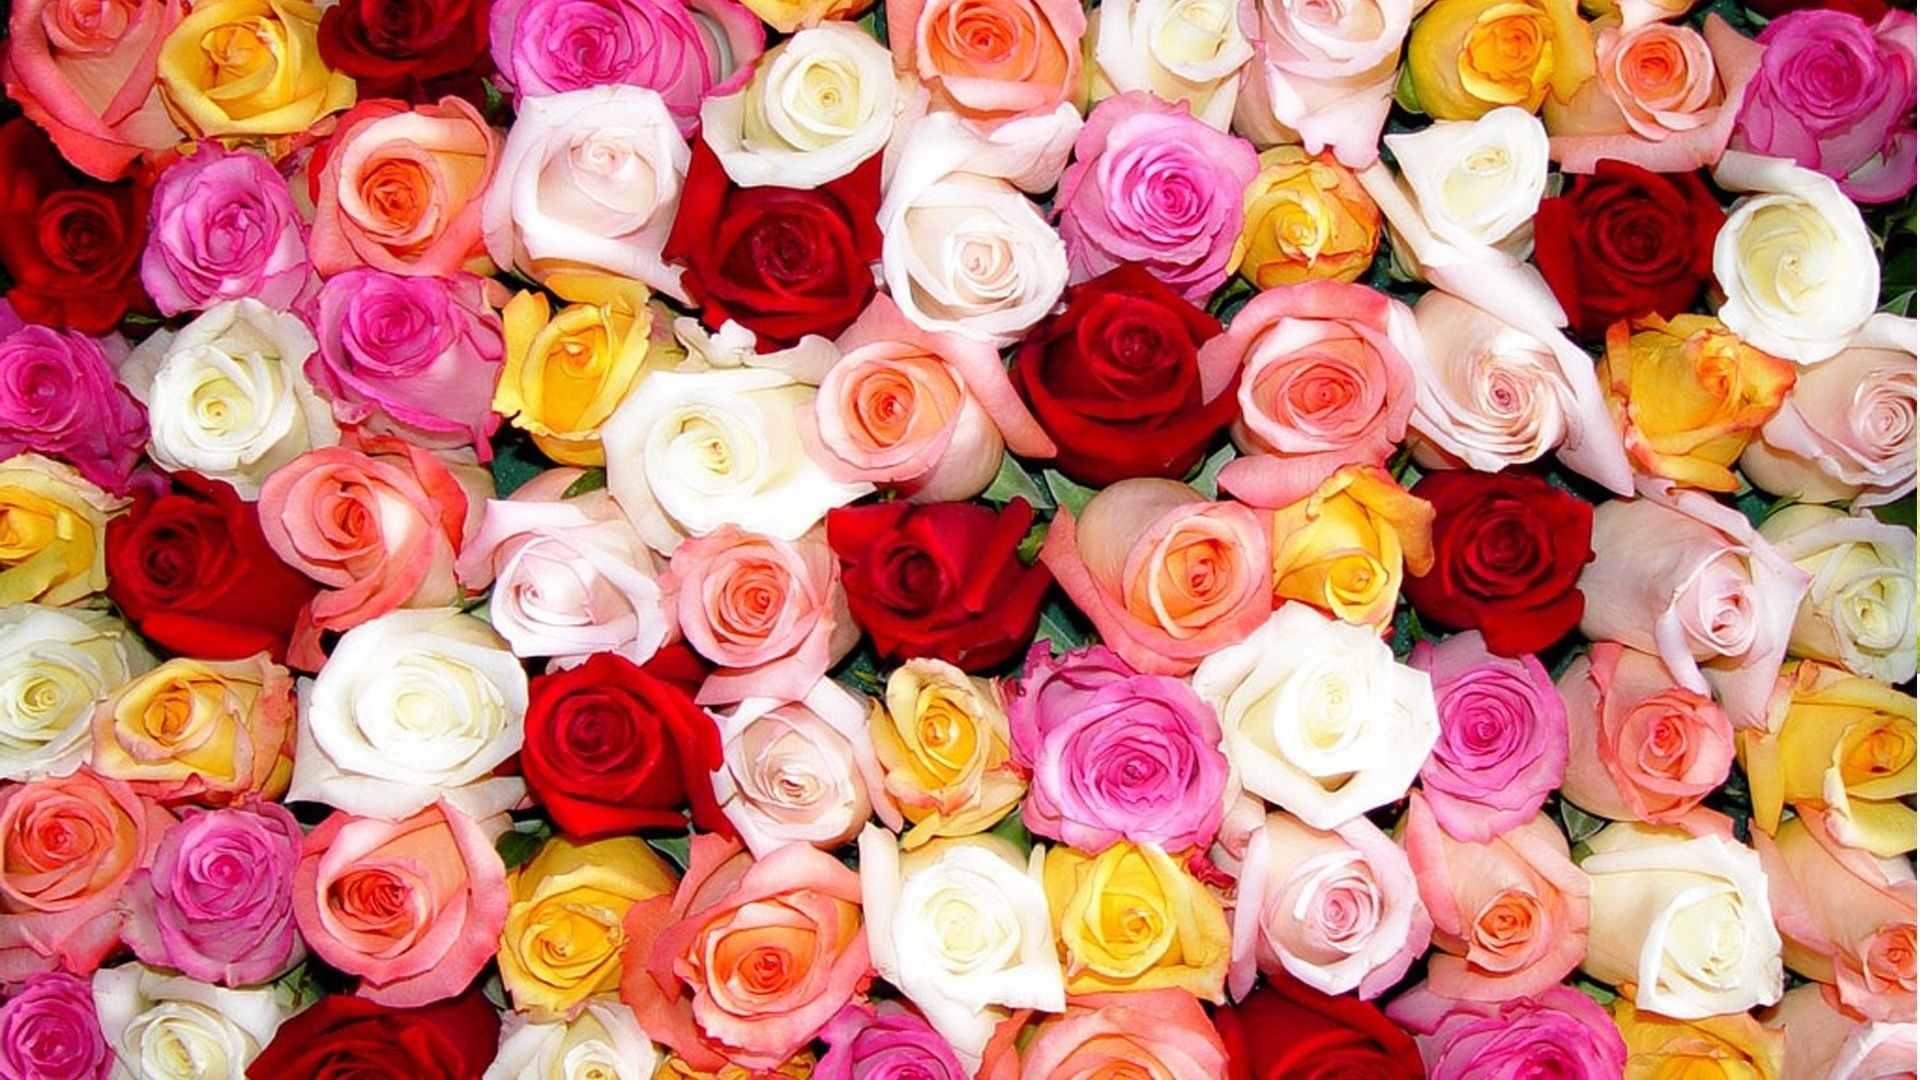 General 1920x1080 rose colorful flowers plants